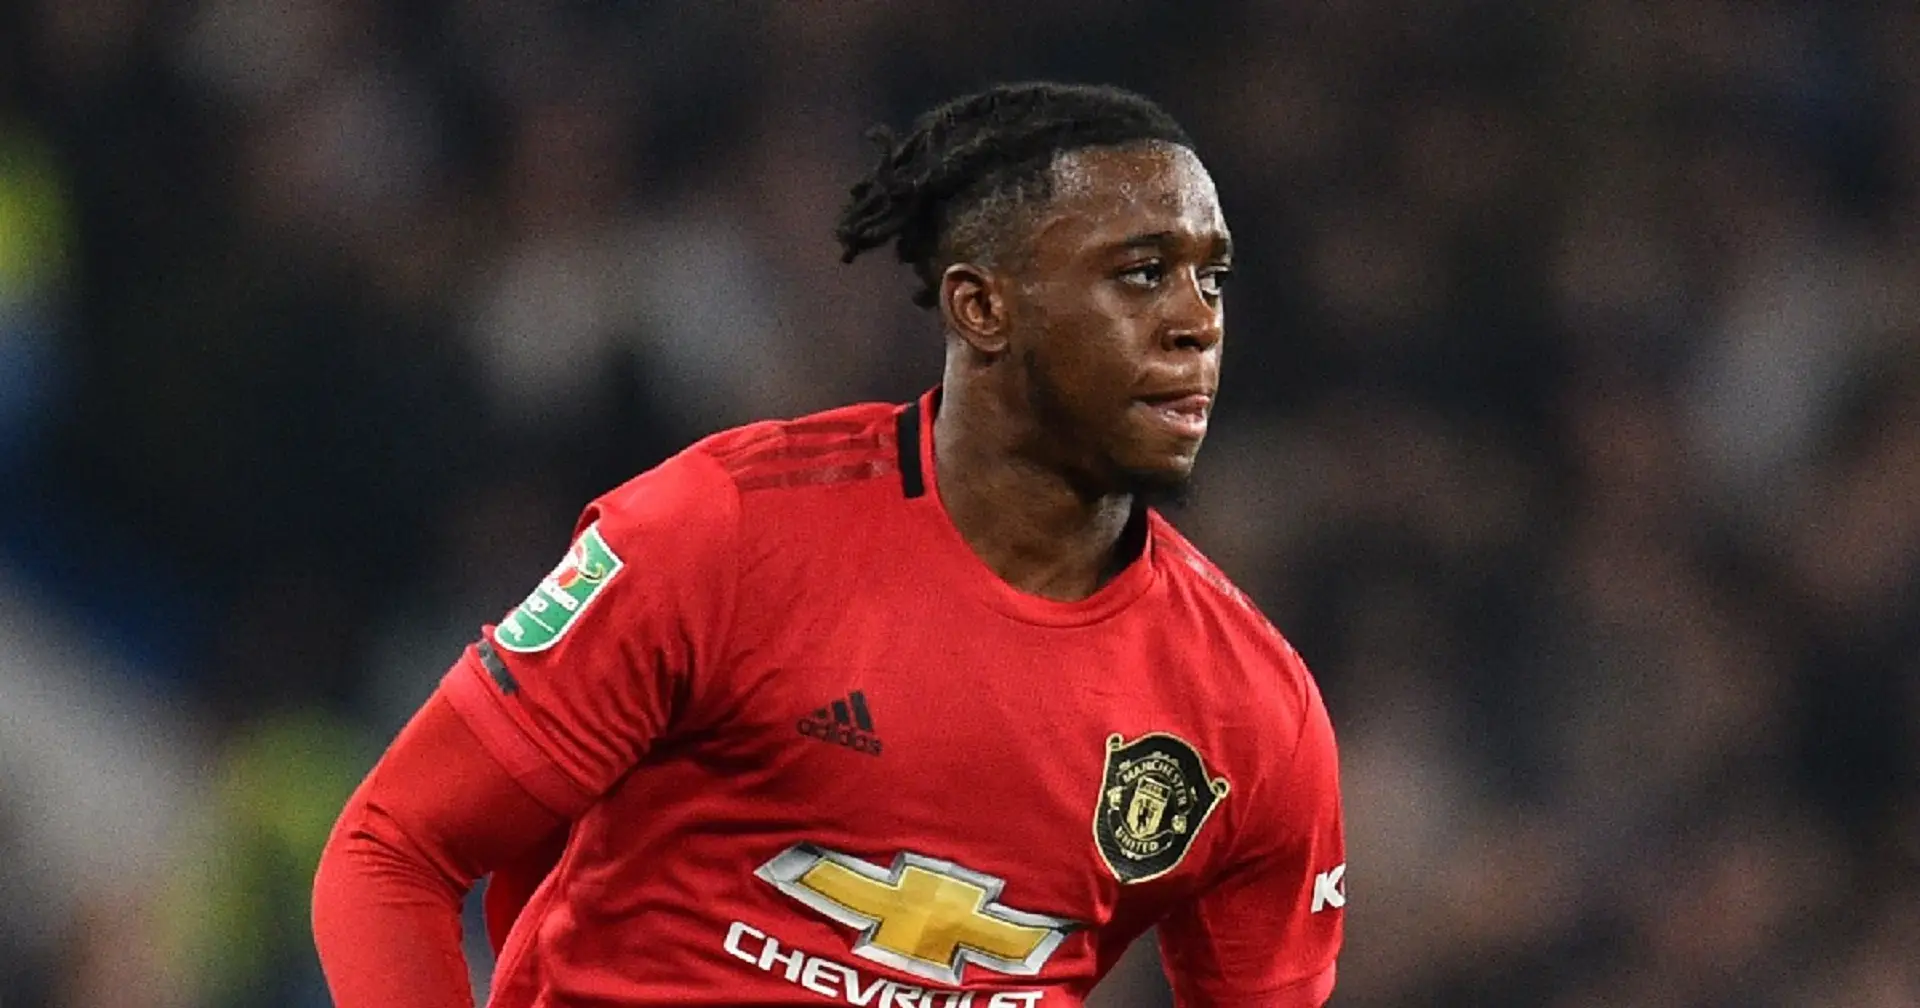 'Worst right-back display in years': Global United fan community reacts to Wan-Bissaka's poor show in Brighton win